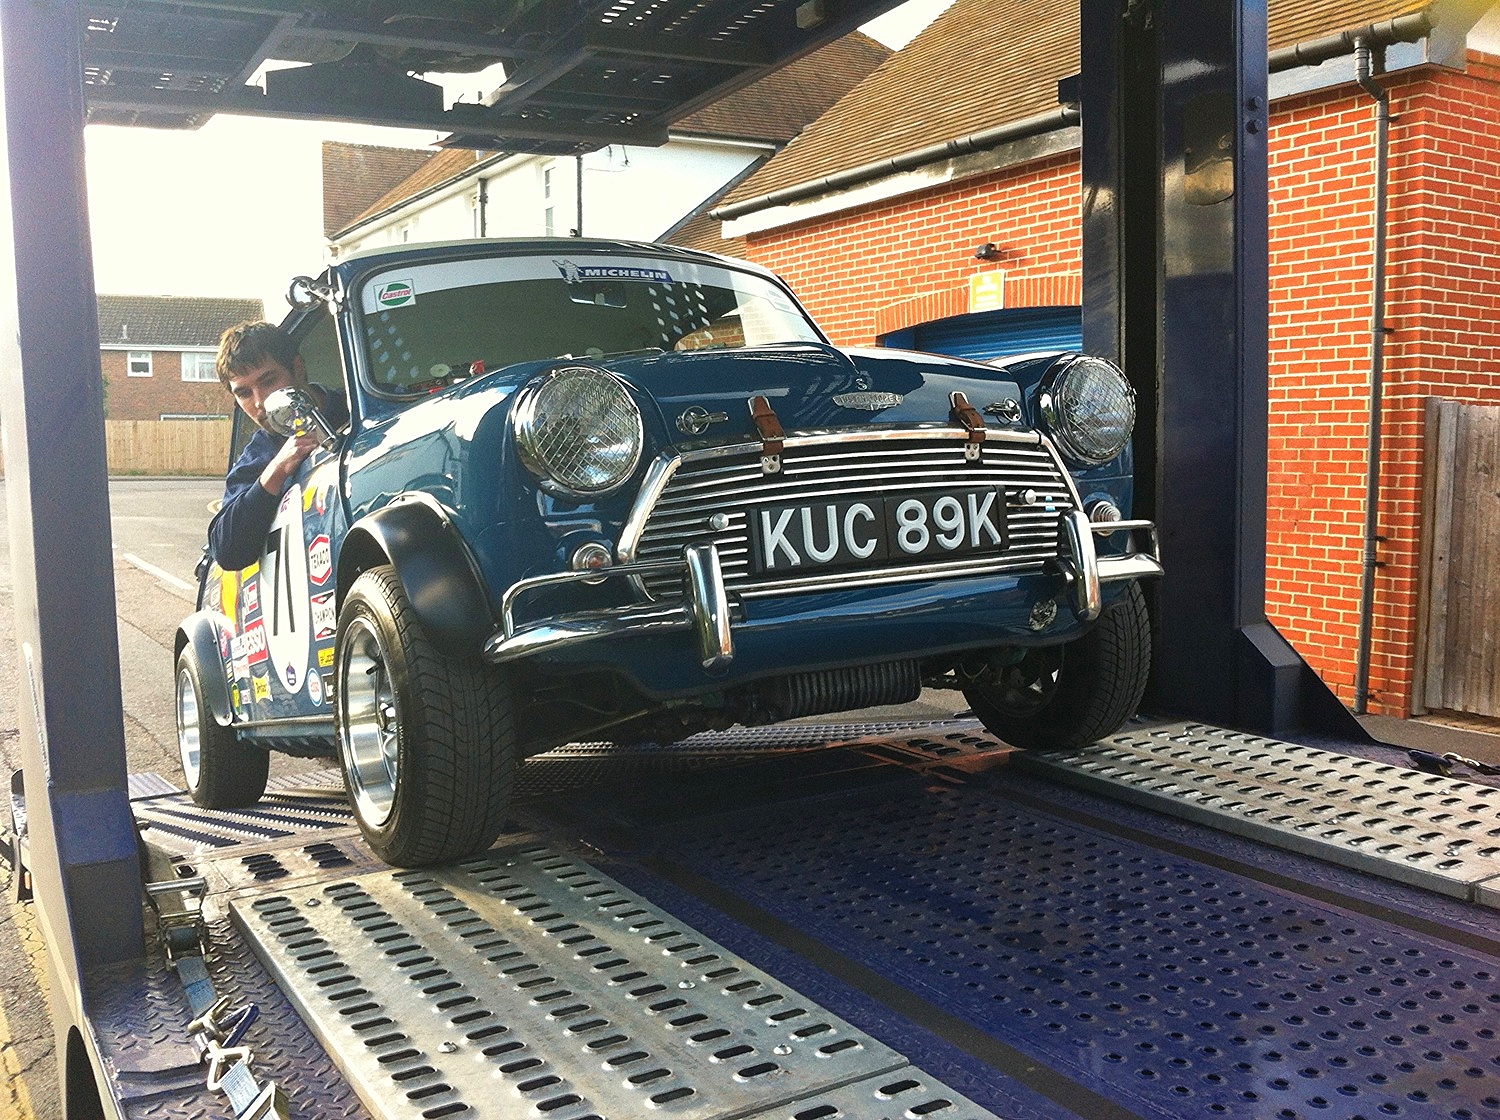 just like the italian job - the cooper delivery in progress